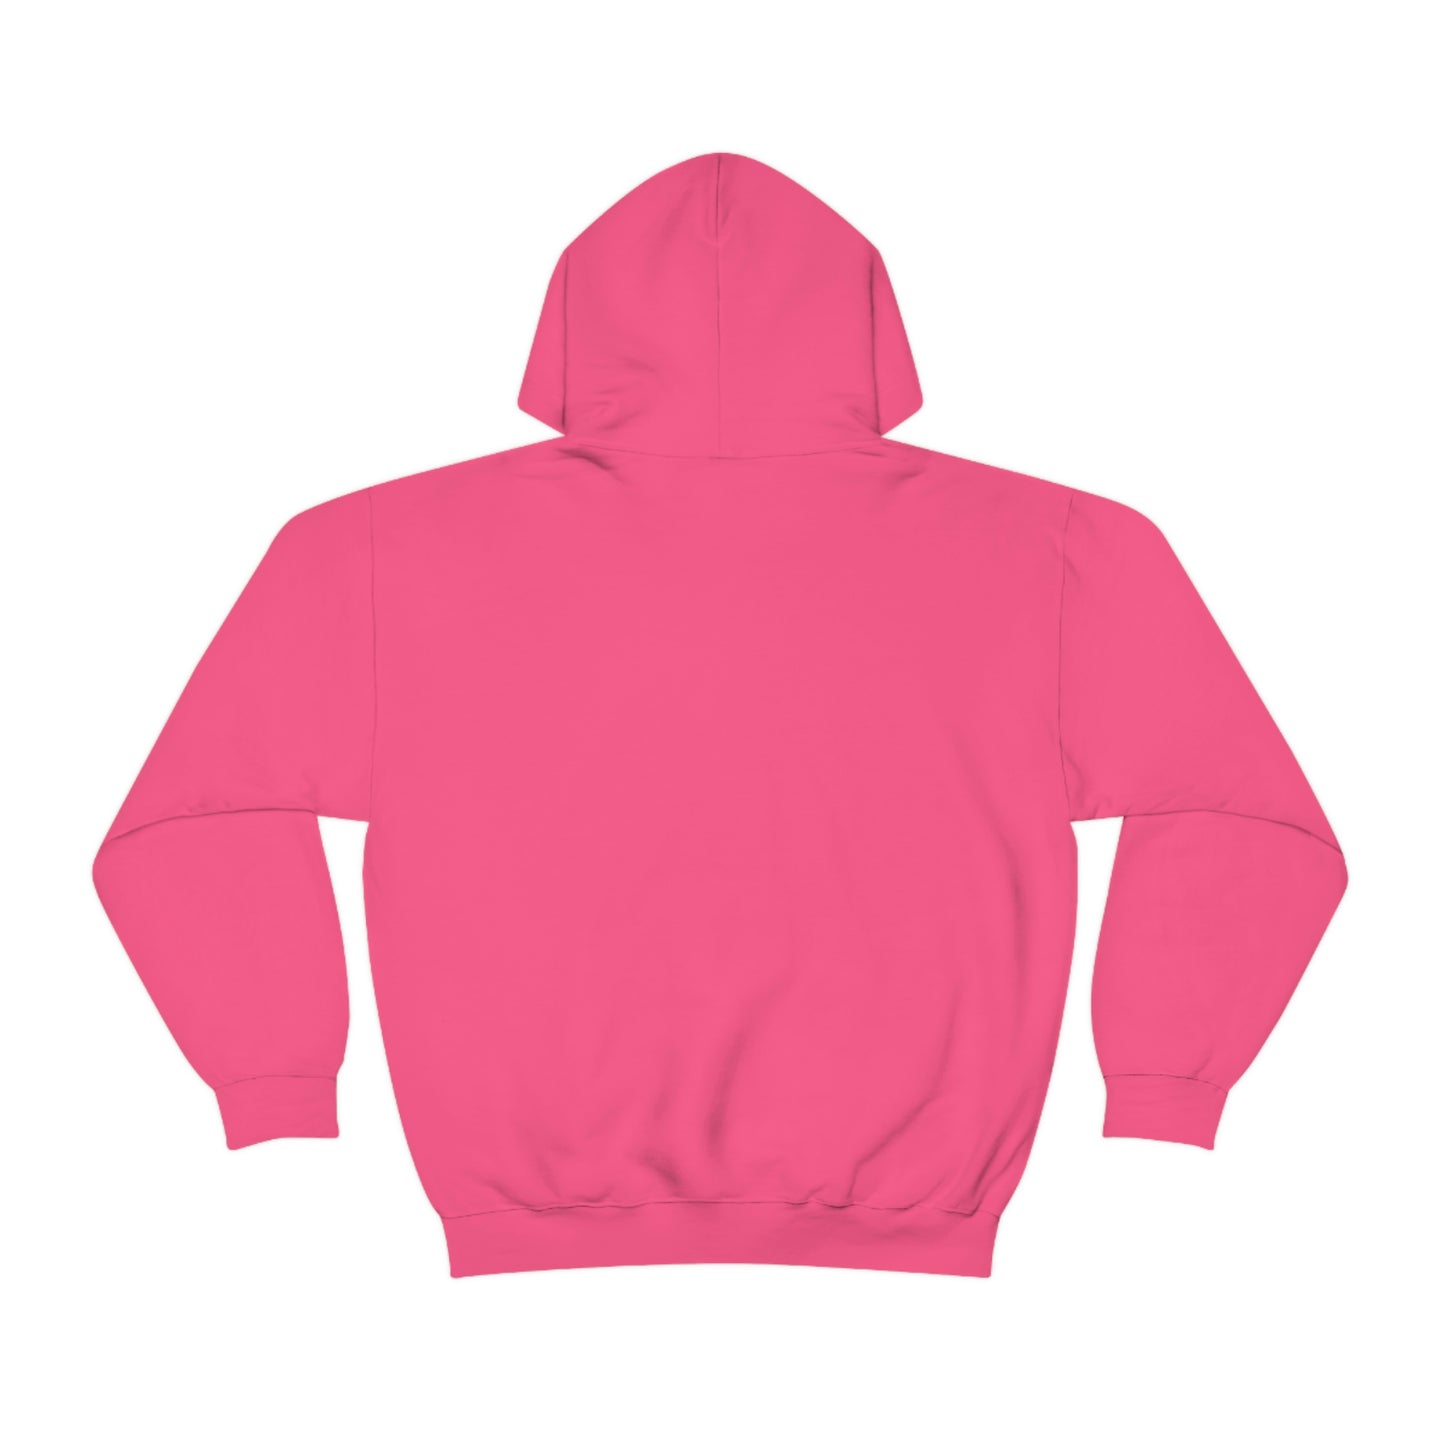 Lady Boss Hoodie - Just Start (Don't Worry That You Don't Have All The Answers Yet)